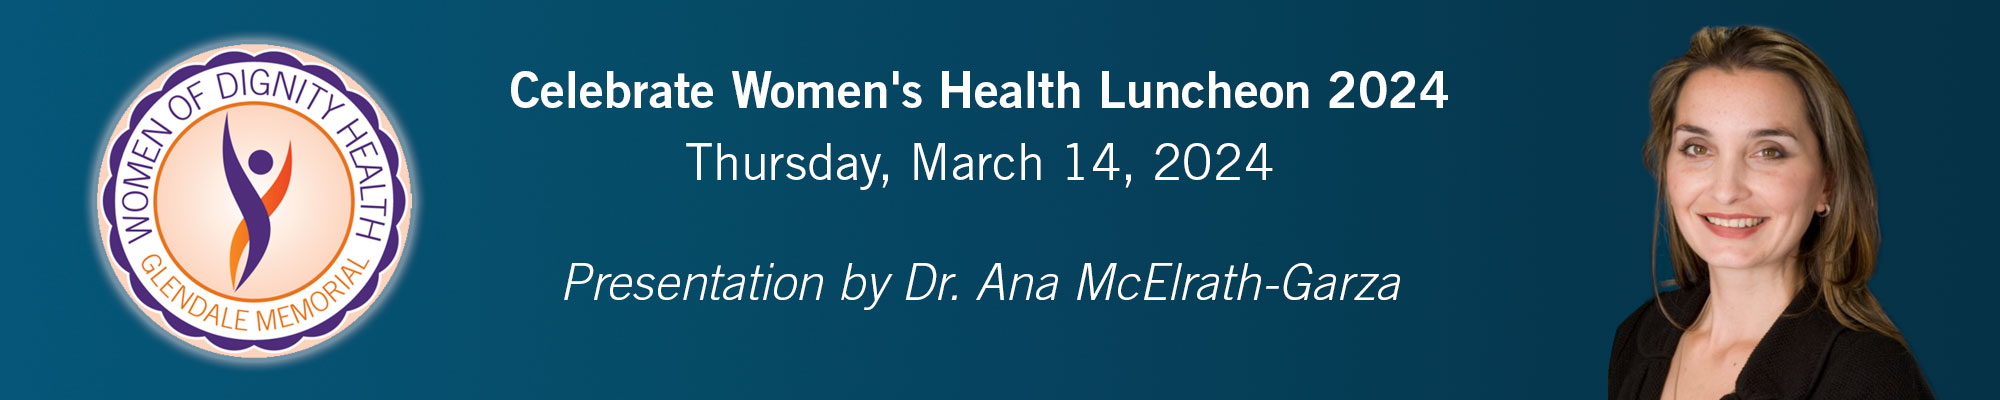 Women of Dignity Health logo plus photo of Dr. Ana McElrath-Garza plus text for luncheon. 